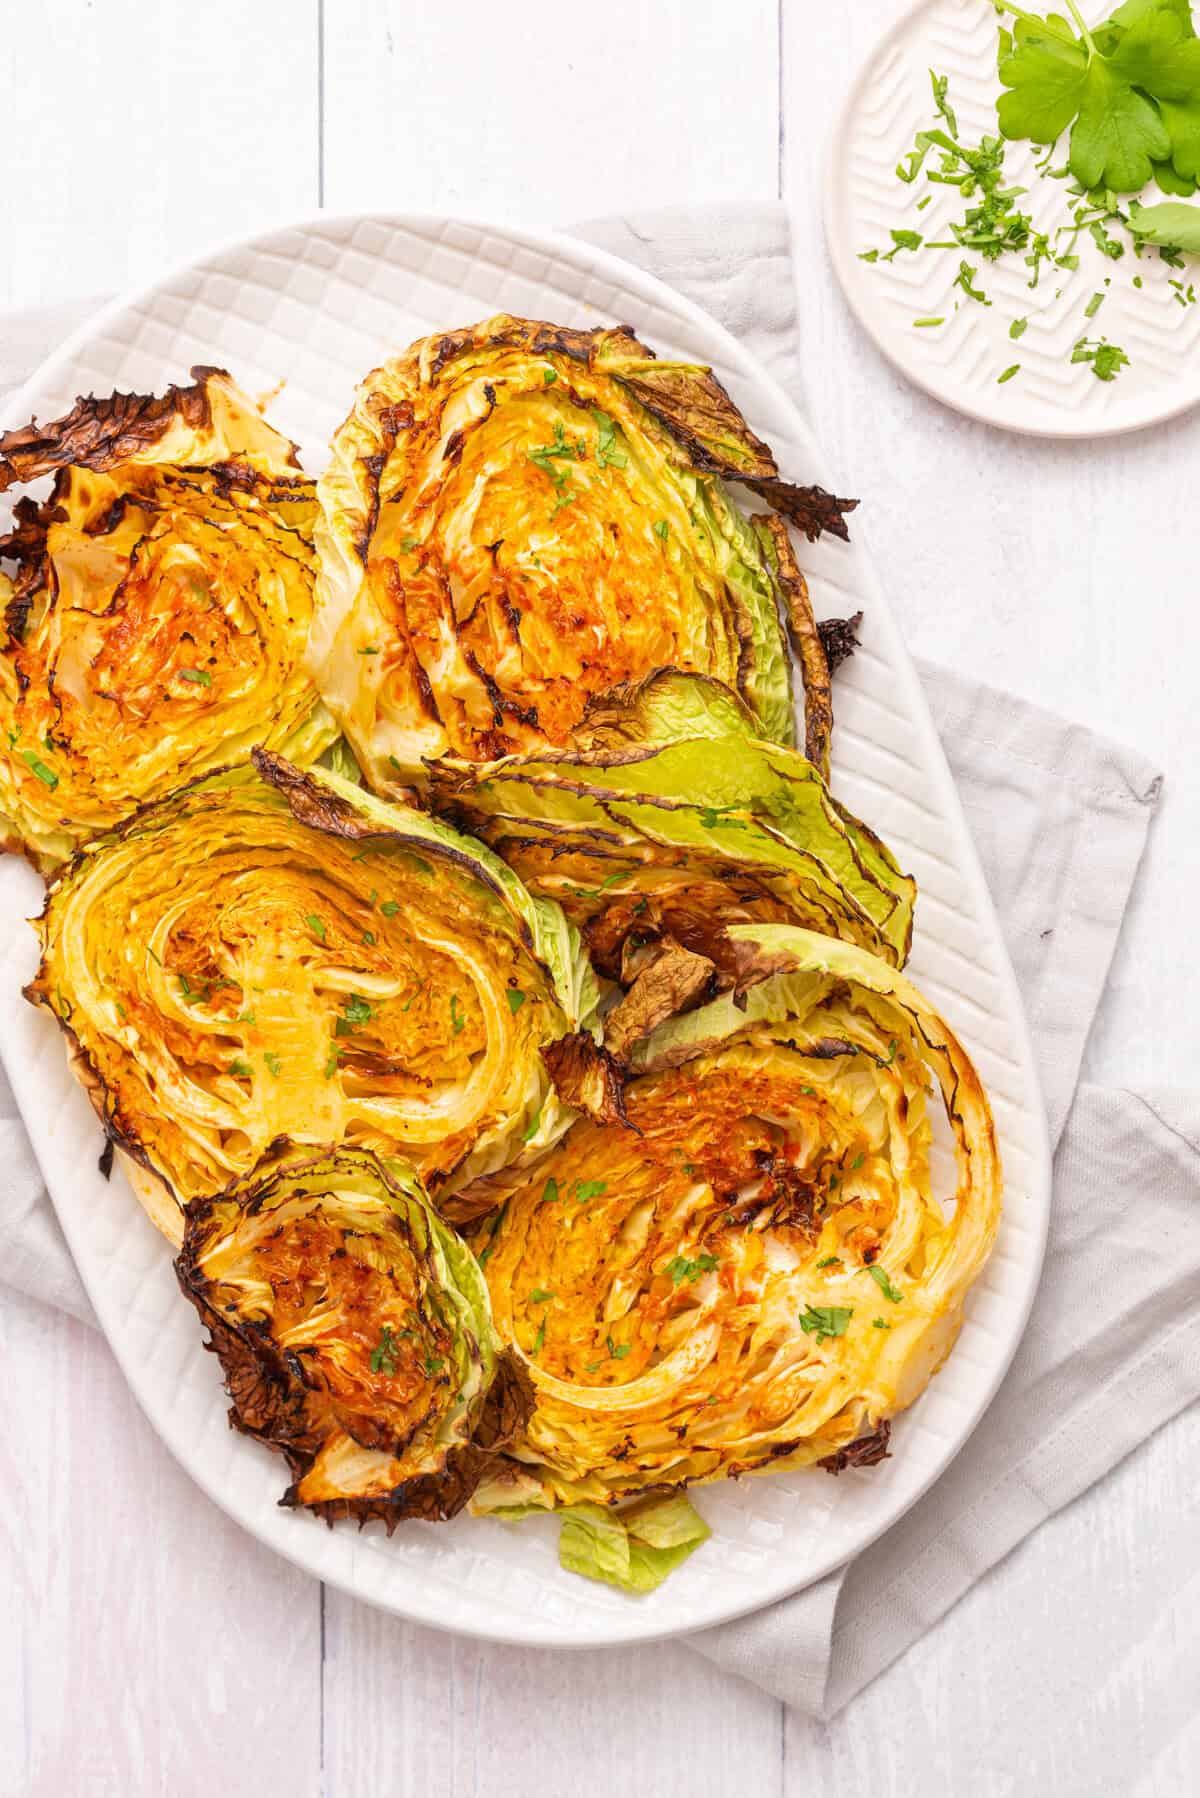 An overhead image of roasted cabbage steaks on a serving plate.